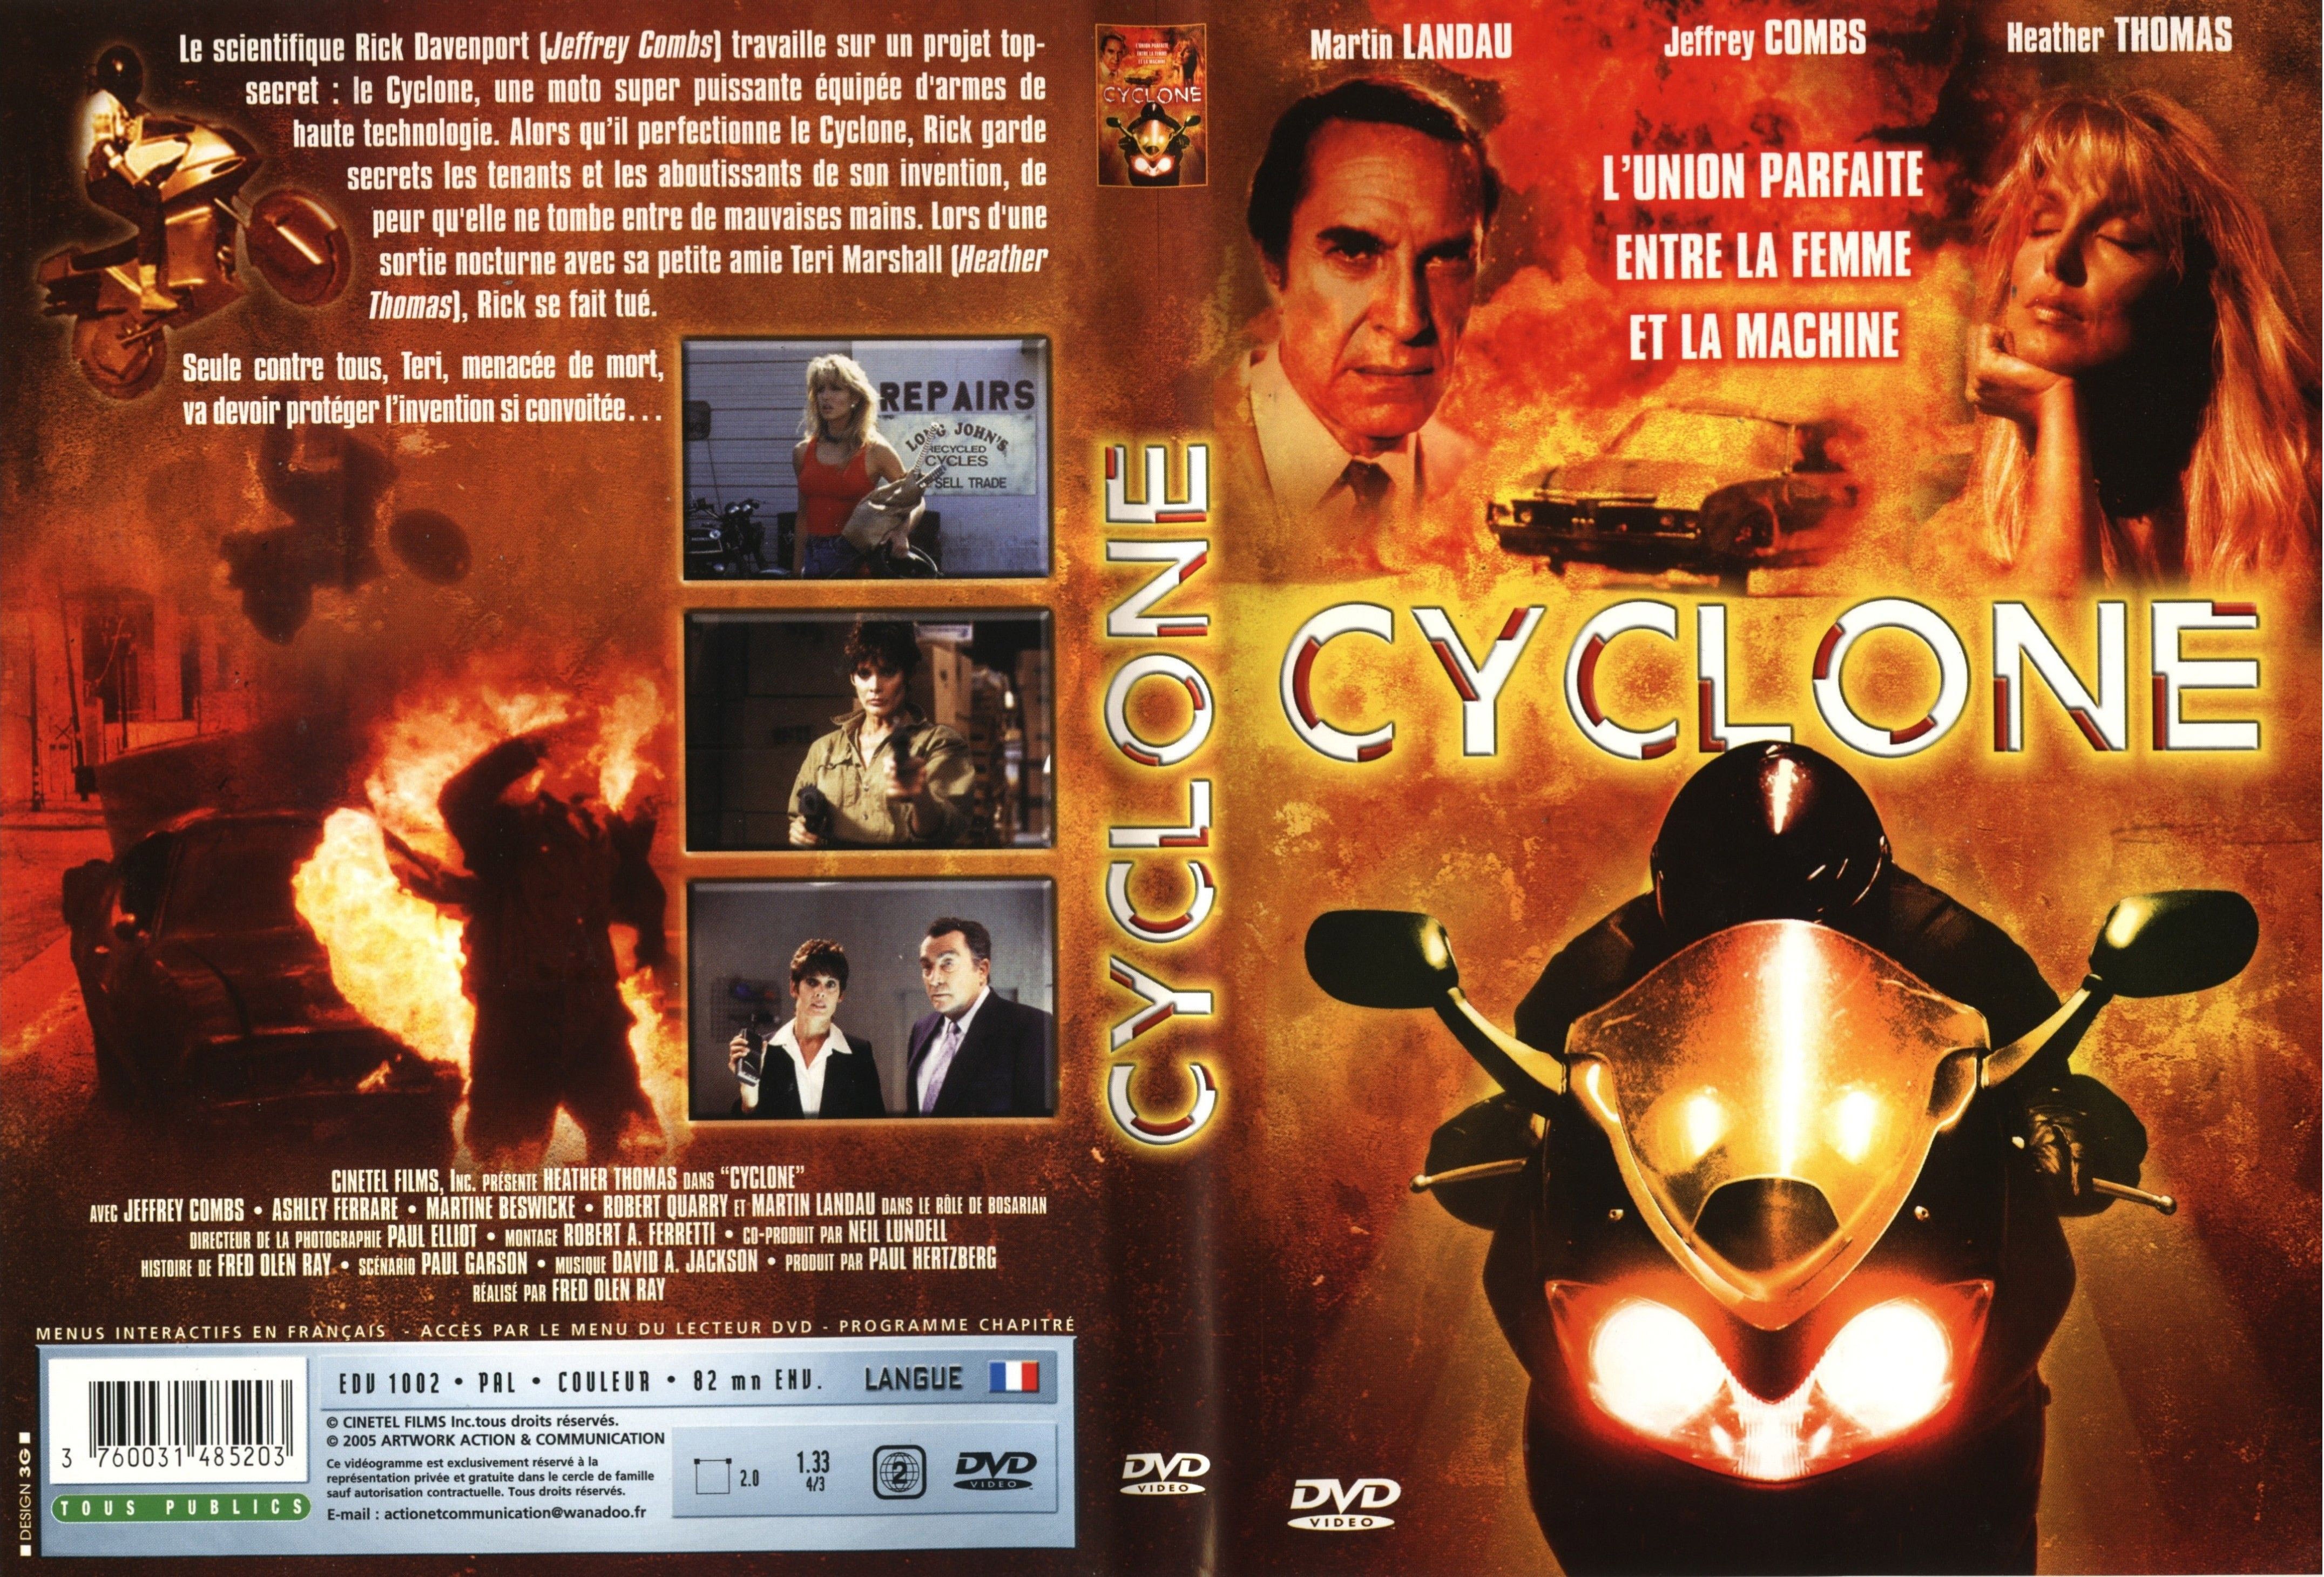 Jaquette DVD Cyclone